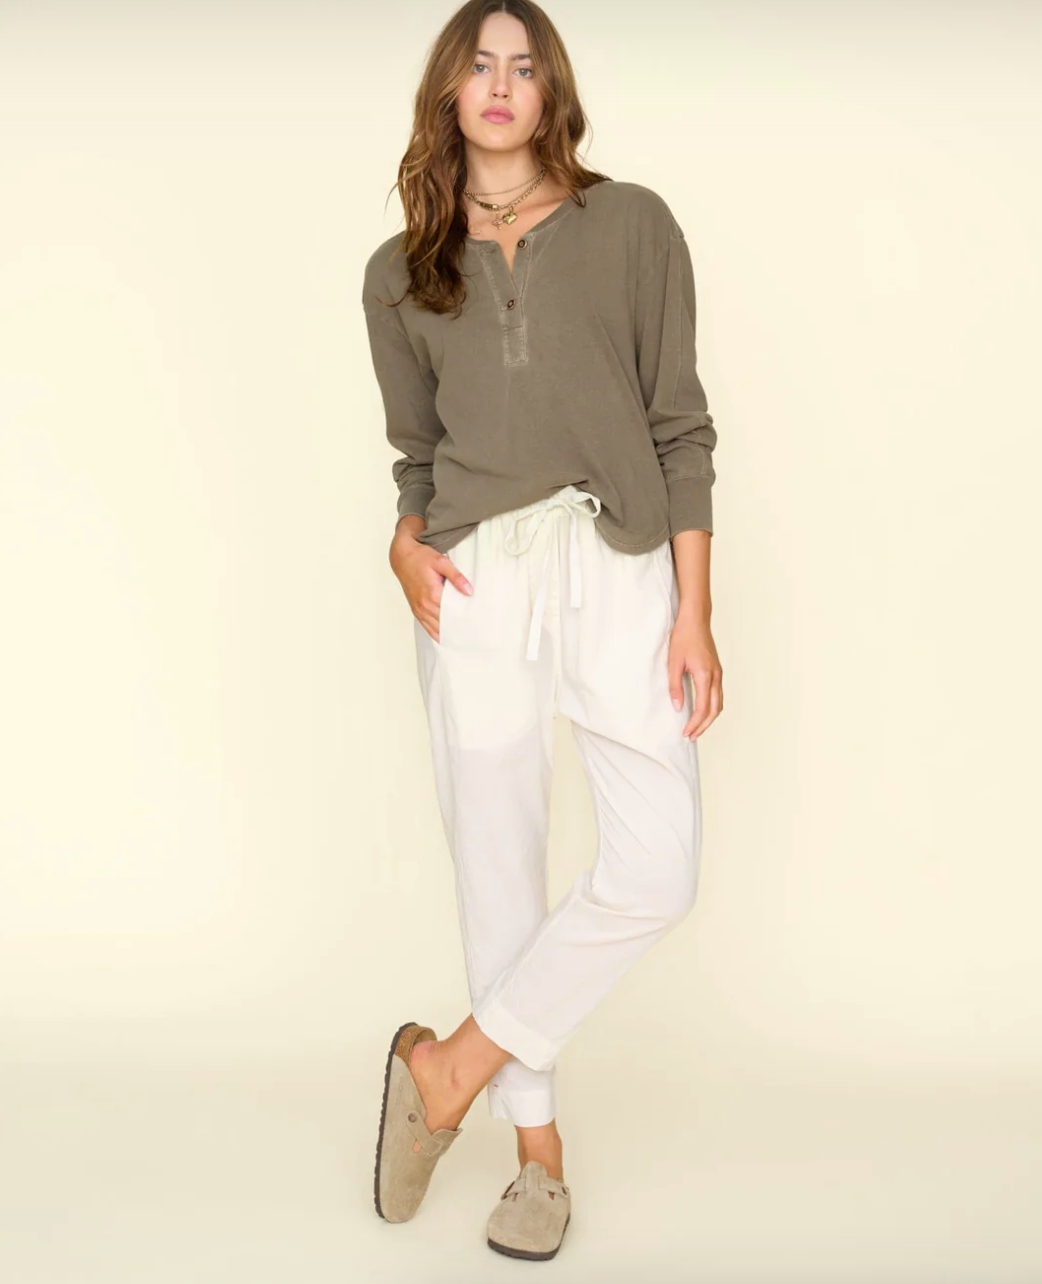 A person with long brown hair stands posing against a plain light background. They are wearing a sage green long-sleeved henley shirt, Xirena Sand Draper Pant, and beige slip-on shoes. With a relaxed posture and one hand in their pocket, they exude the effortless charm of a Scottsdale bungalow resident.